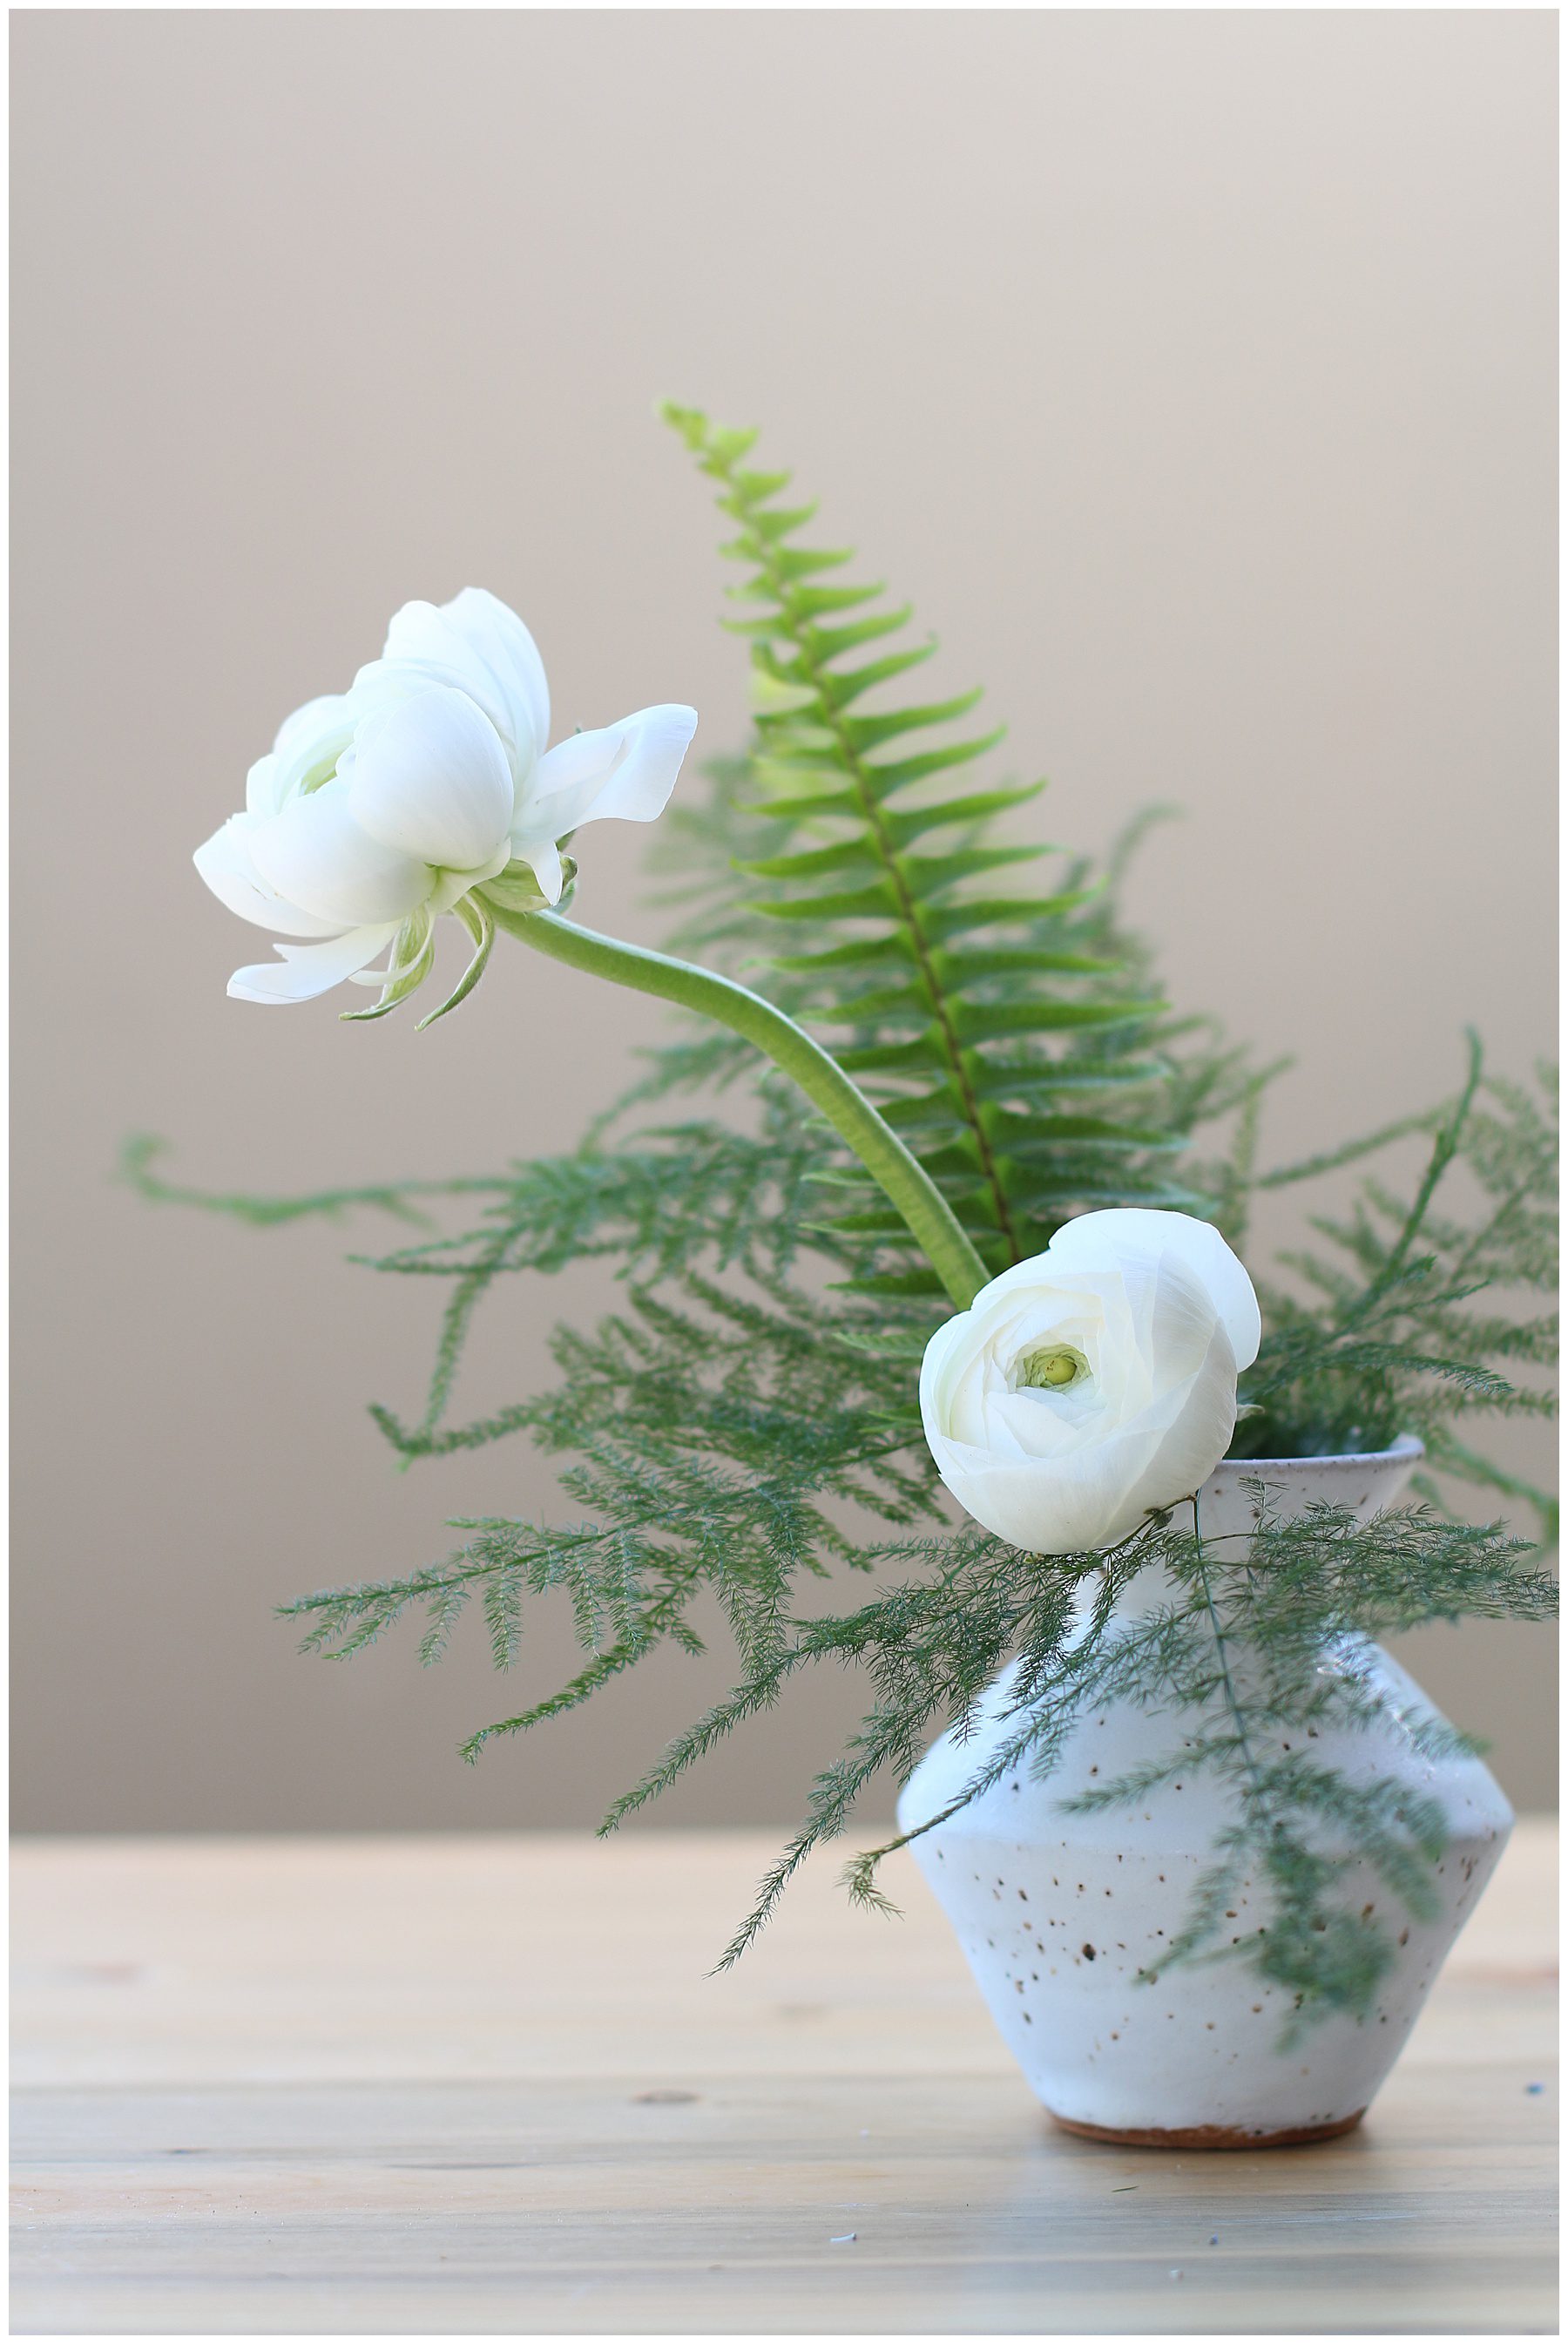 clay bud vase with white flowers